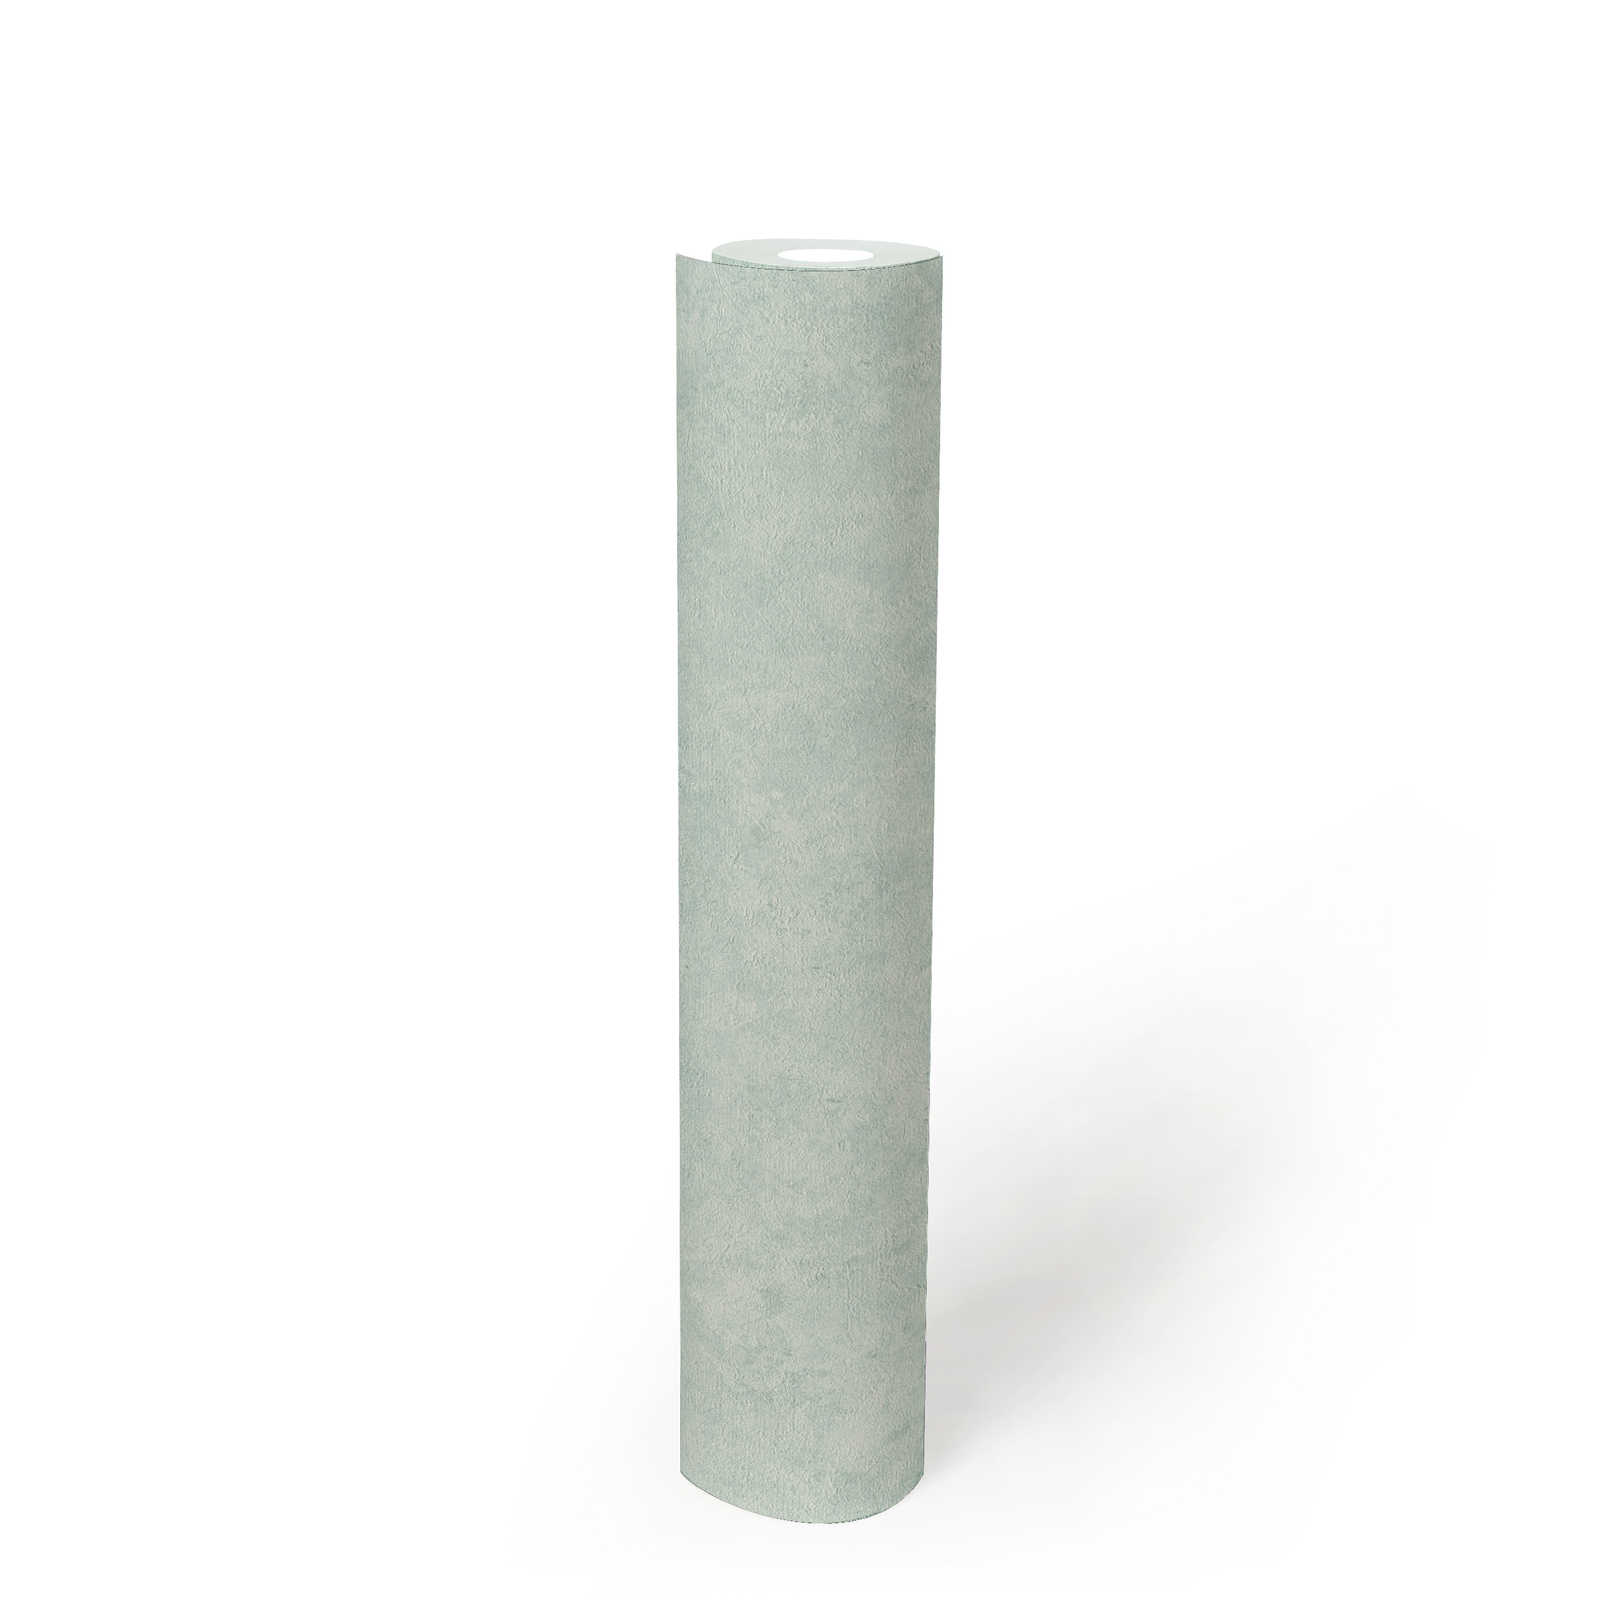             Non-woven wallpaper with plaster structure optics in subtle colours - light green
        